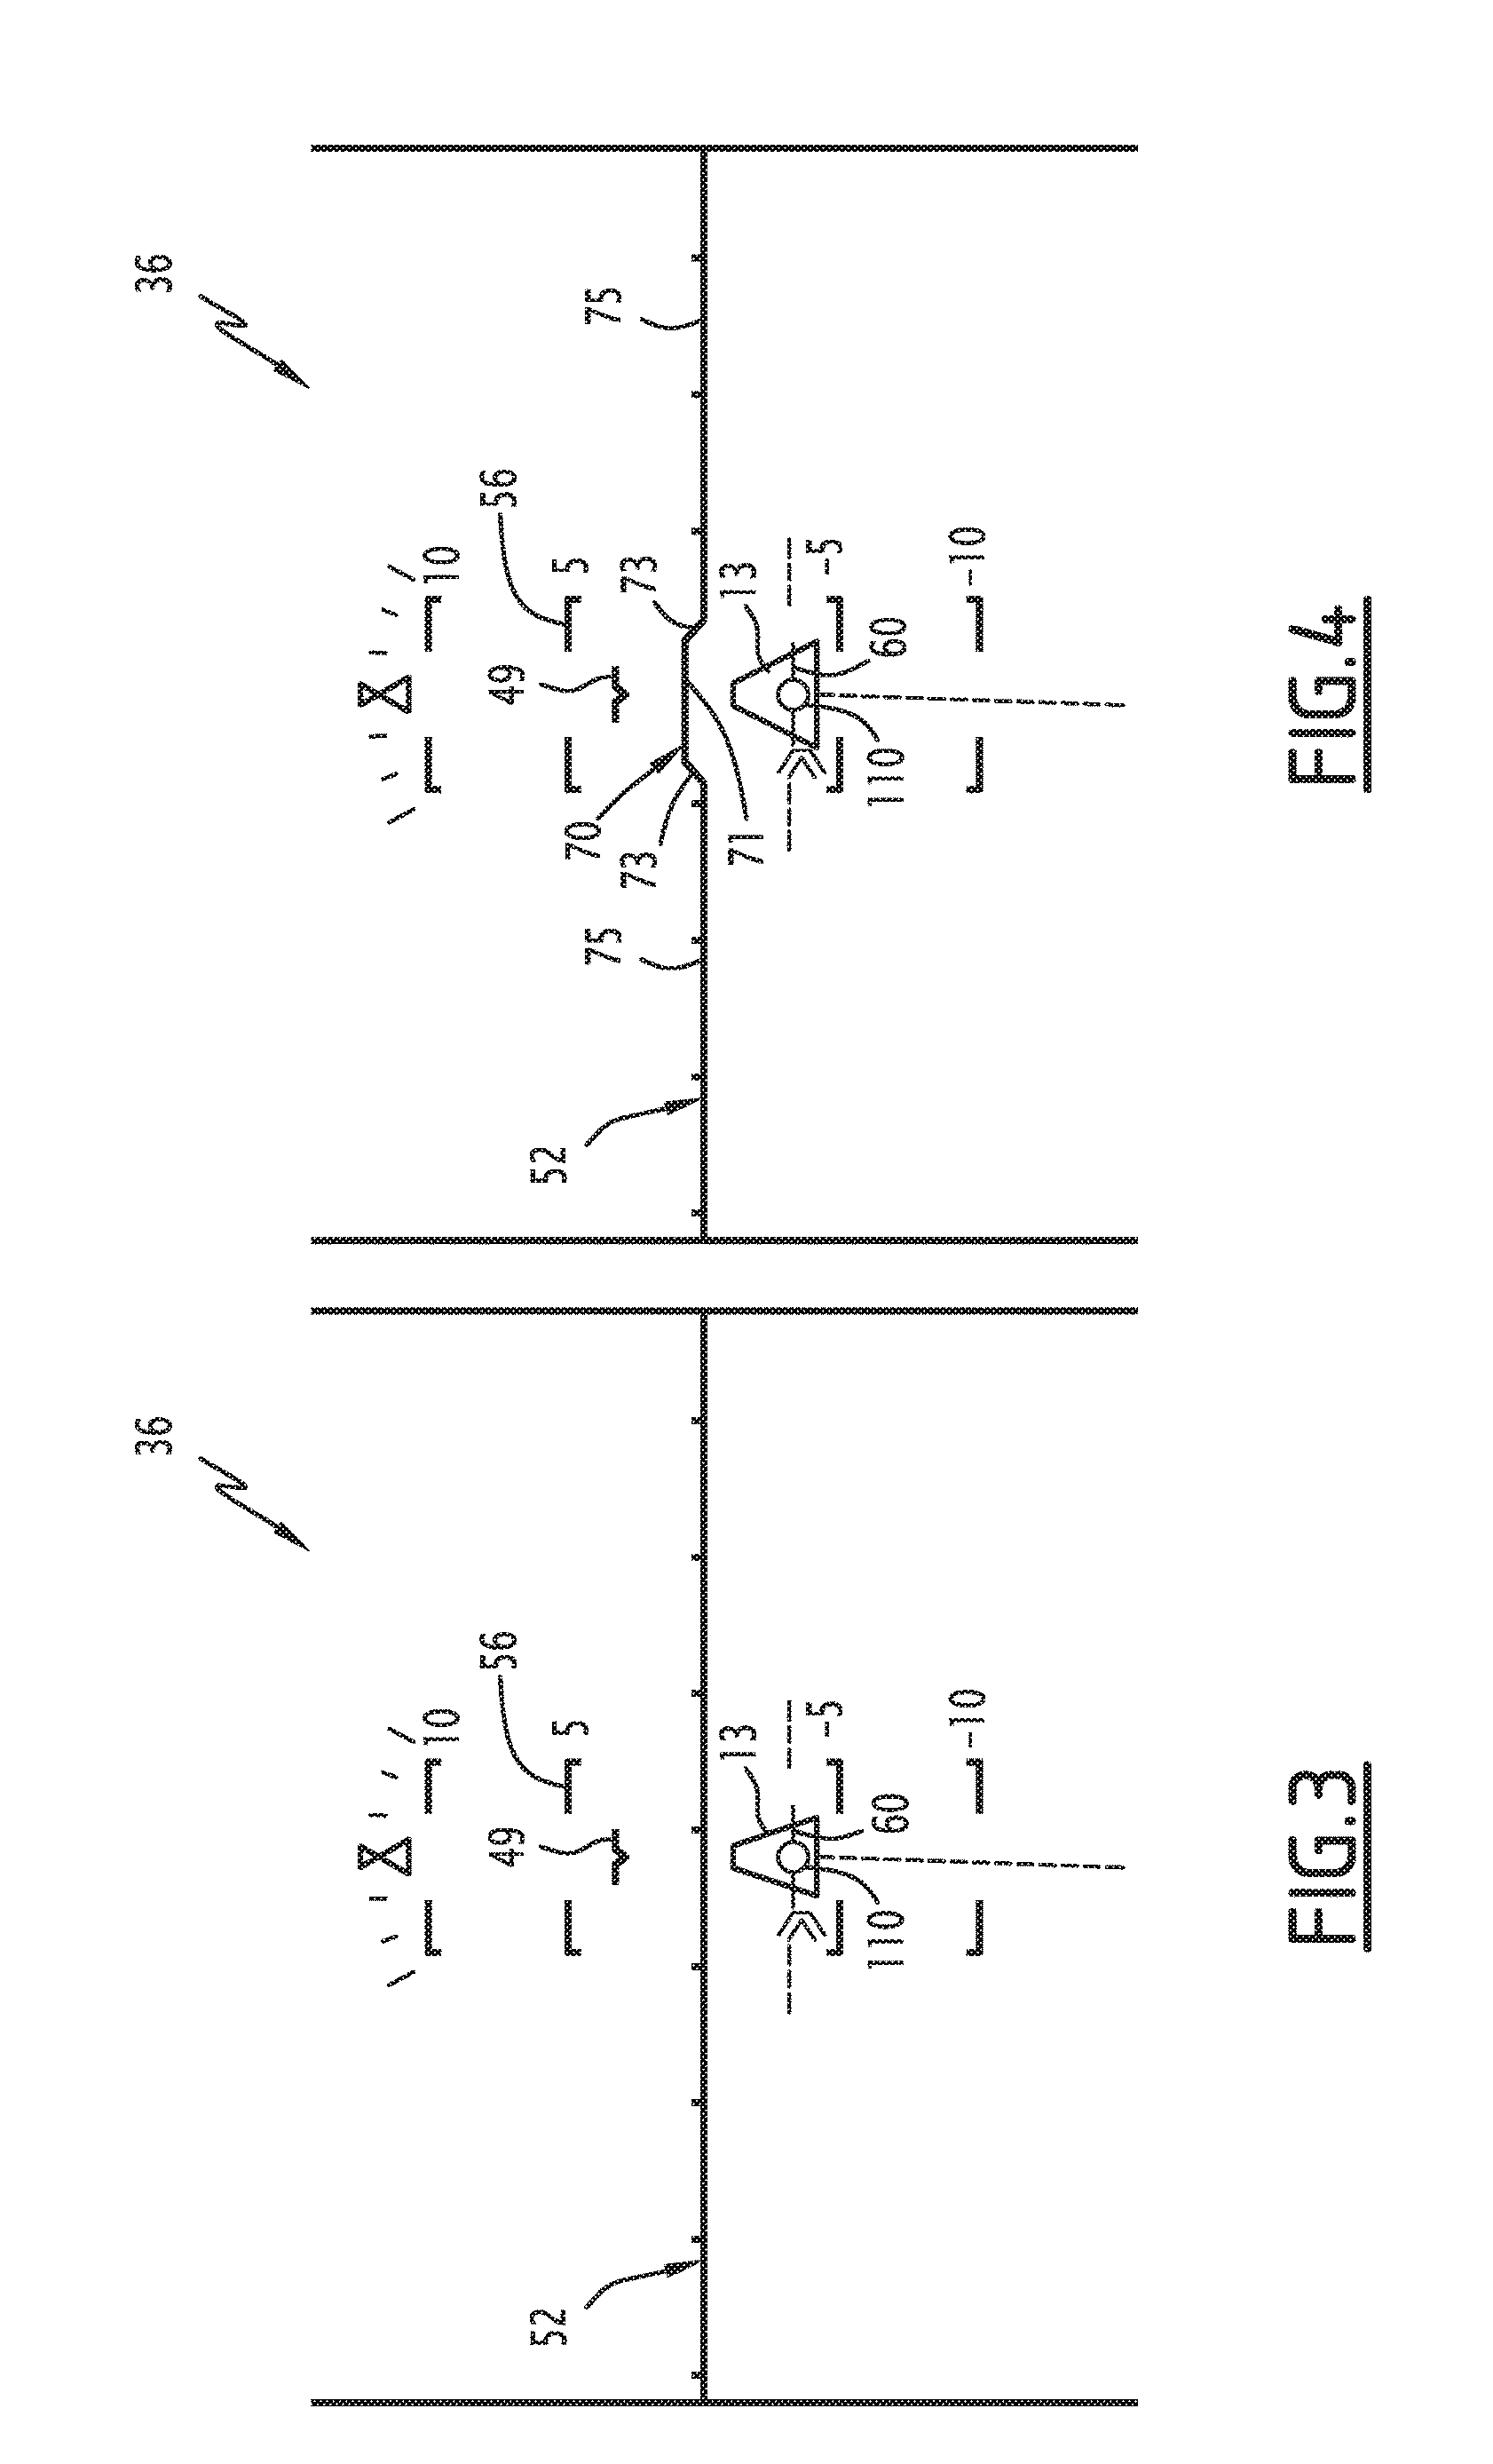 Display system of an aircraft, comprising a flare guiding cue and related method